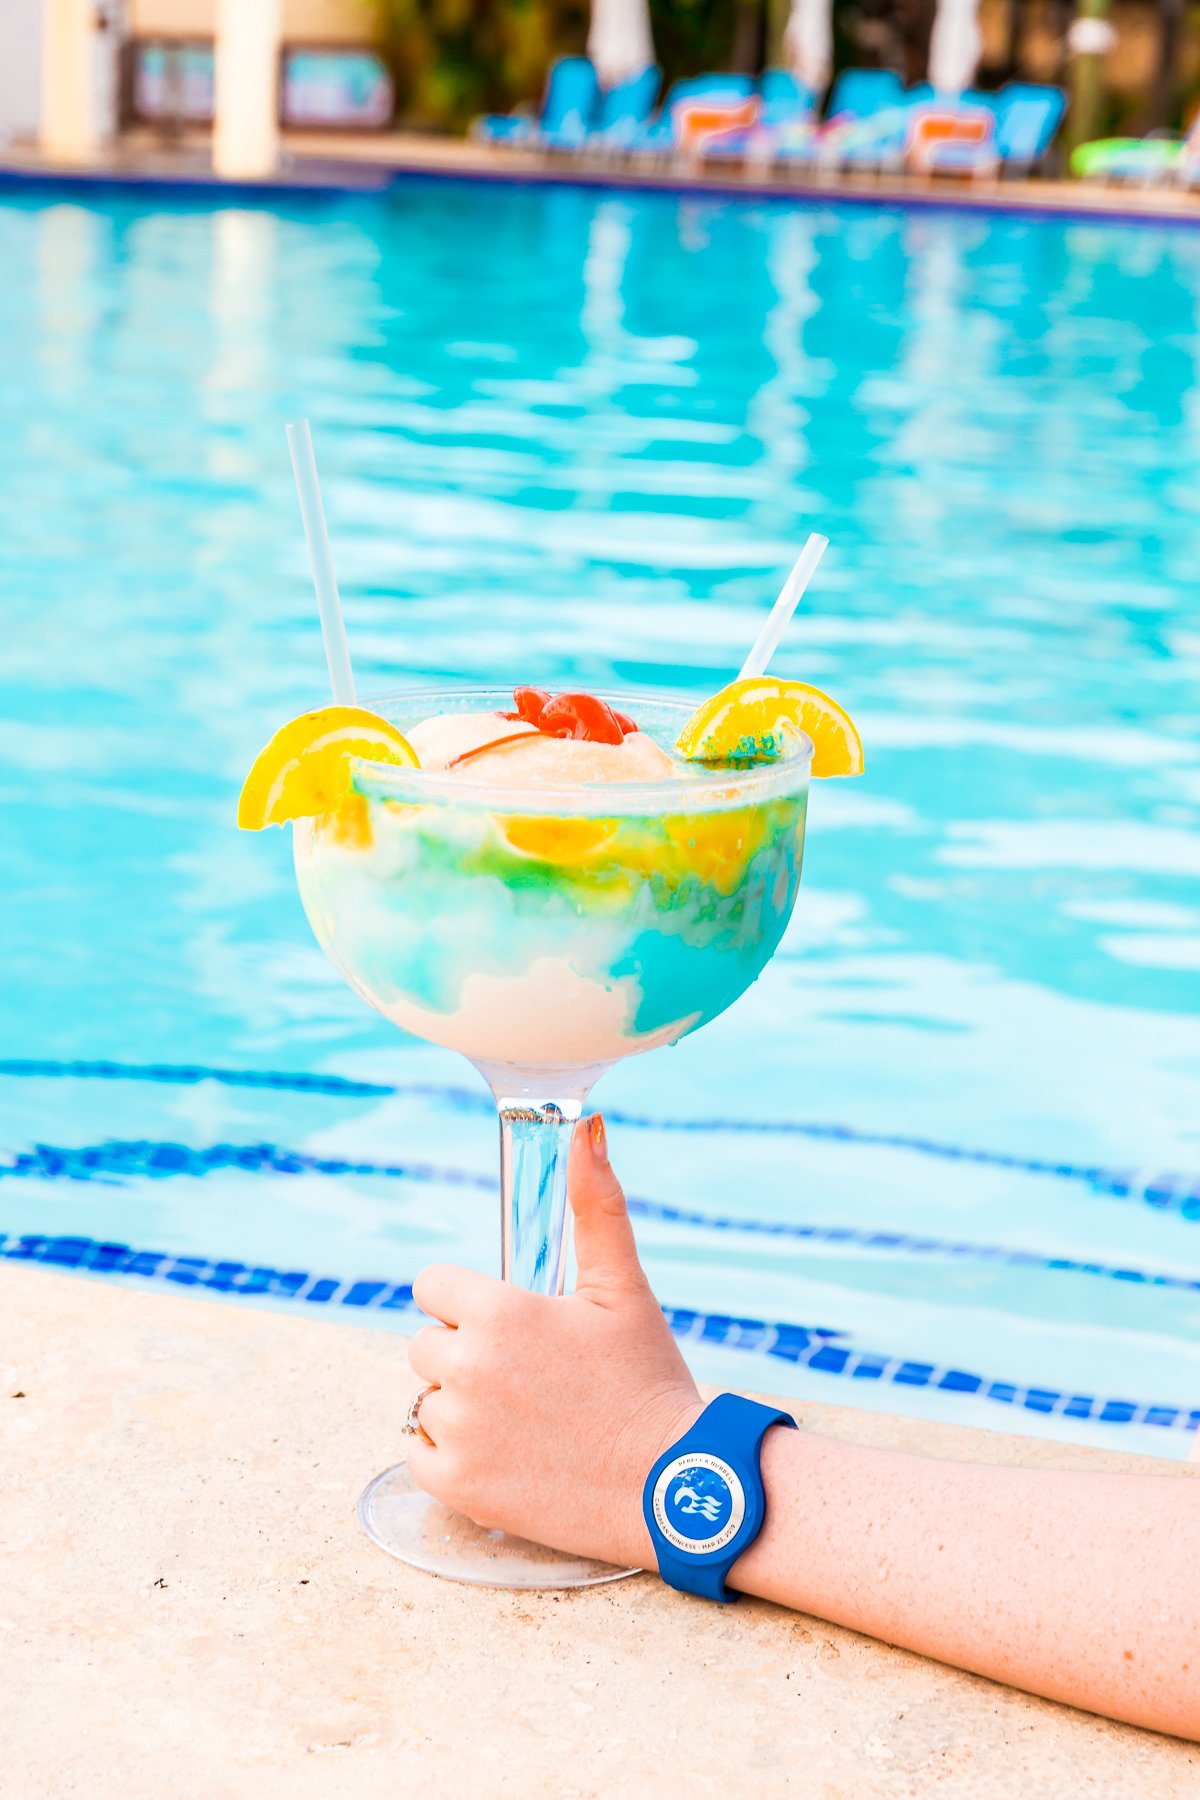 Frozen blue, yellow, and white colada being held by a woman's hand next to a pool.